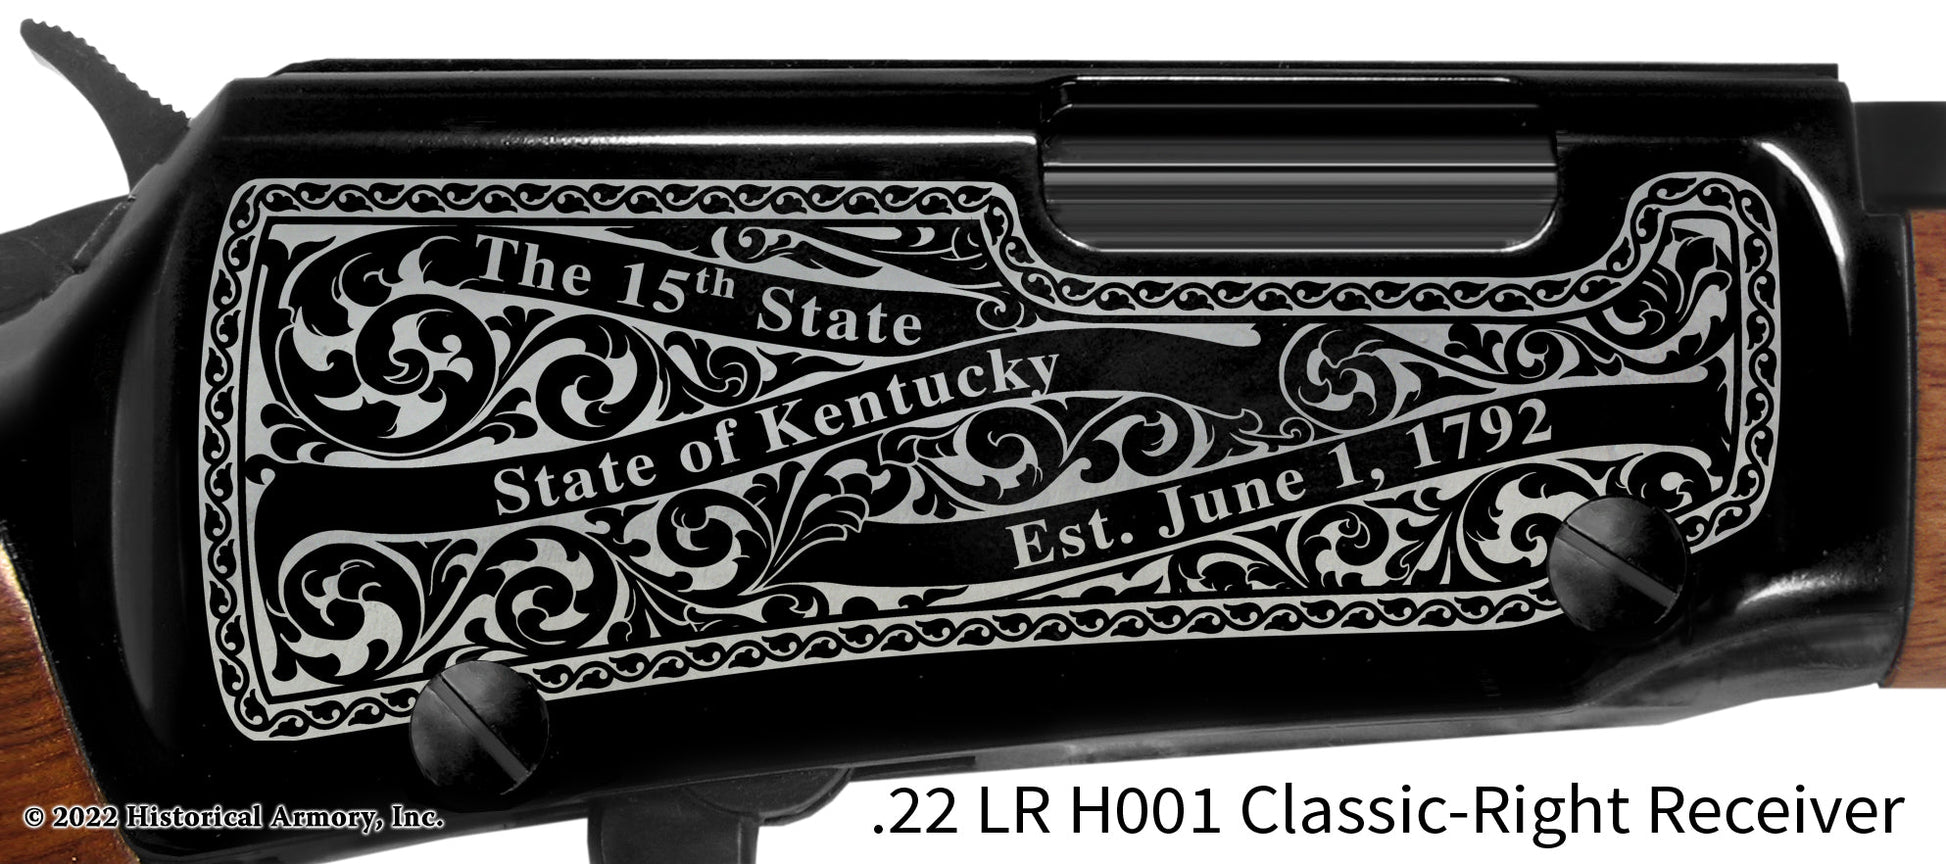 Whitley County Kentucky Engraved Henry H001 Rifle